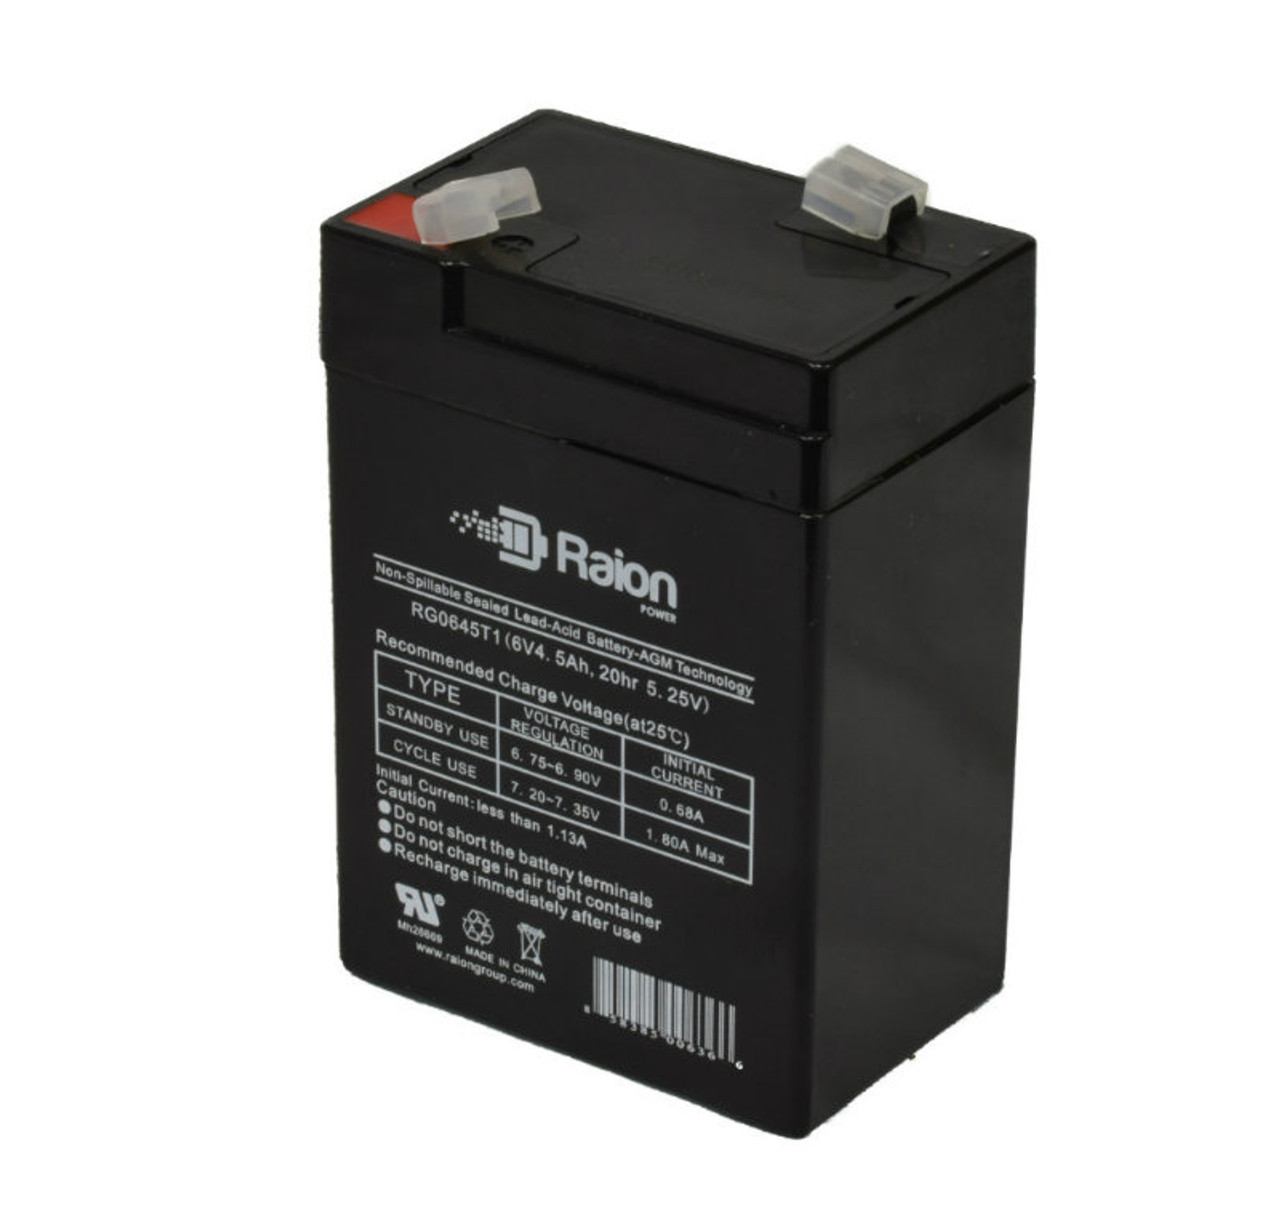 Raion Power RG0645T1 6V 4.5Ah Replacement Battery Cartridge for Lithonia 303S13